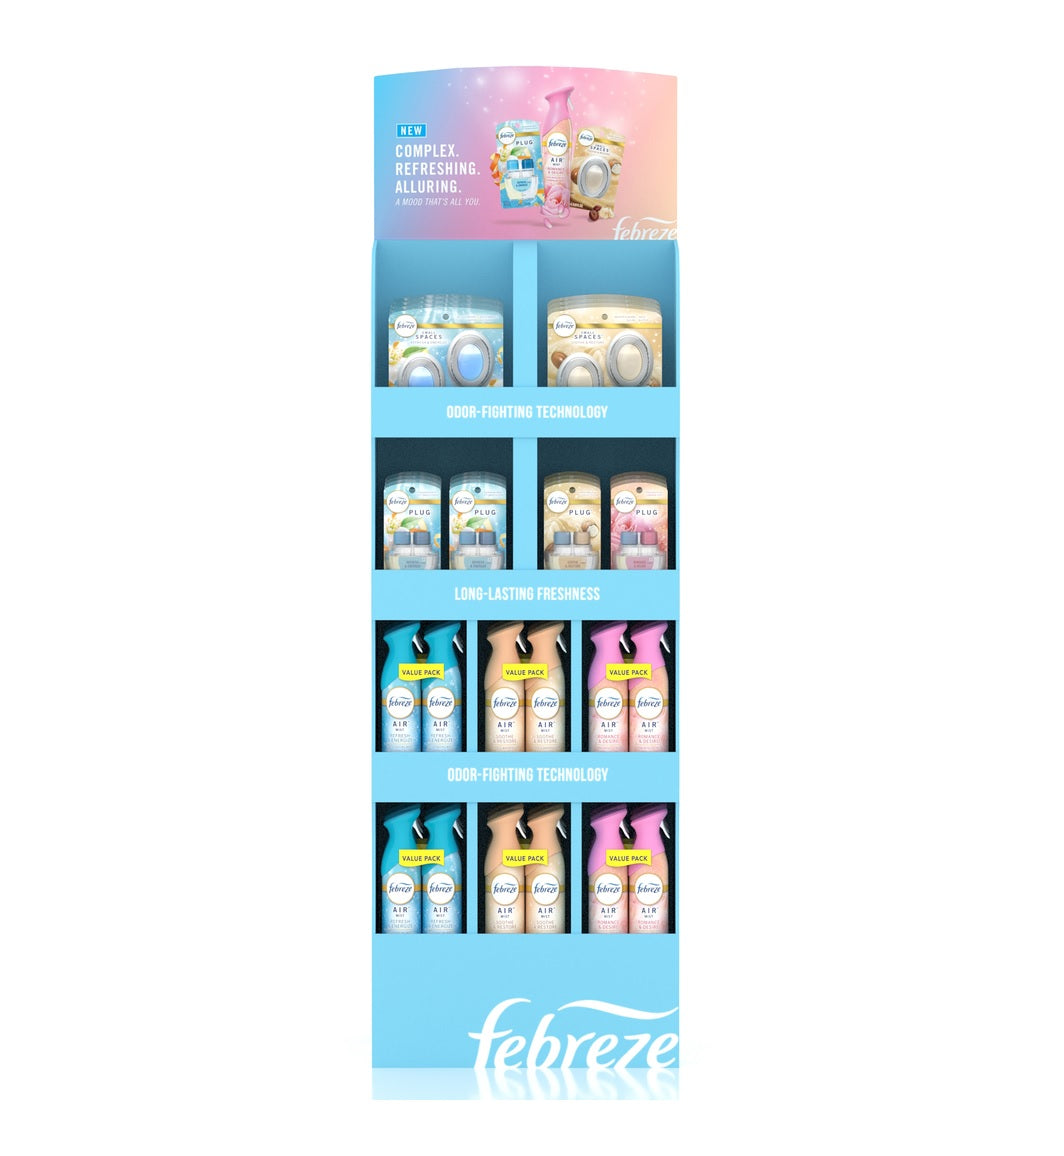 Febreze Mix Floor Stand Display Small Spaces, PLUG Air Refill & Air Freshener Spray Mixed Scent - 42ct